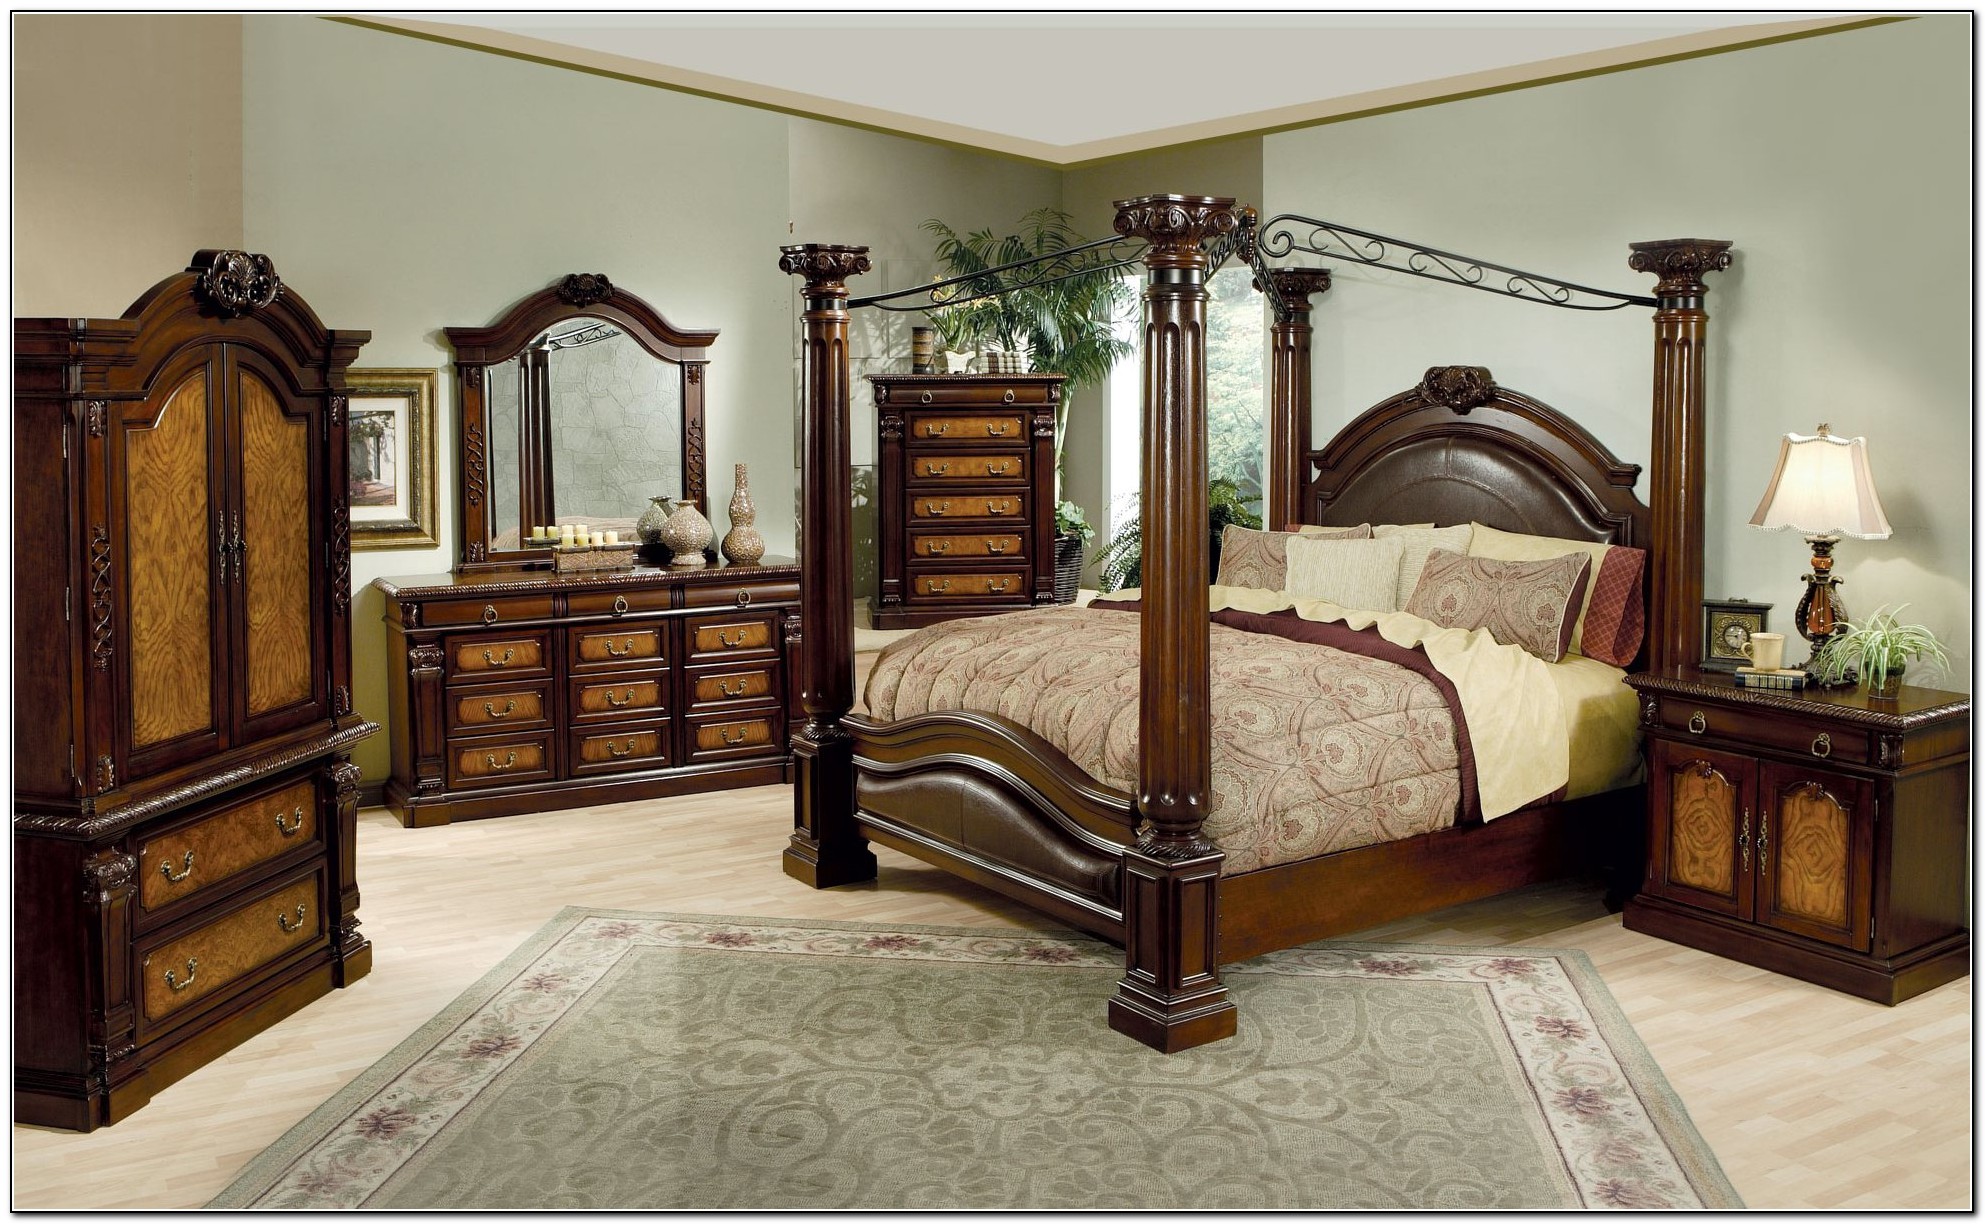 King Size Canopy Bed Frame